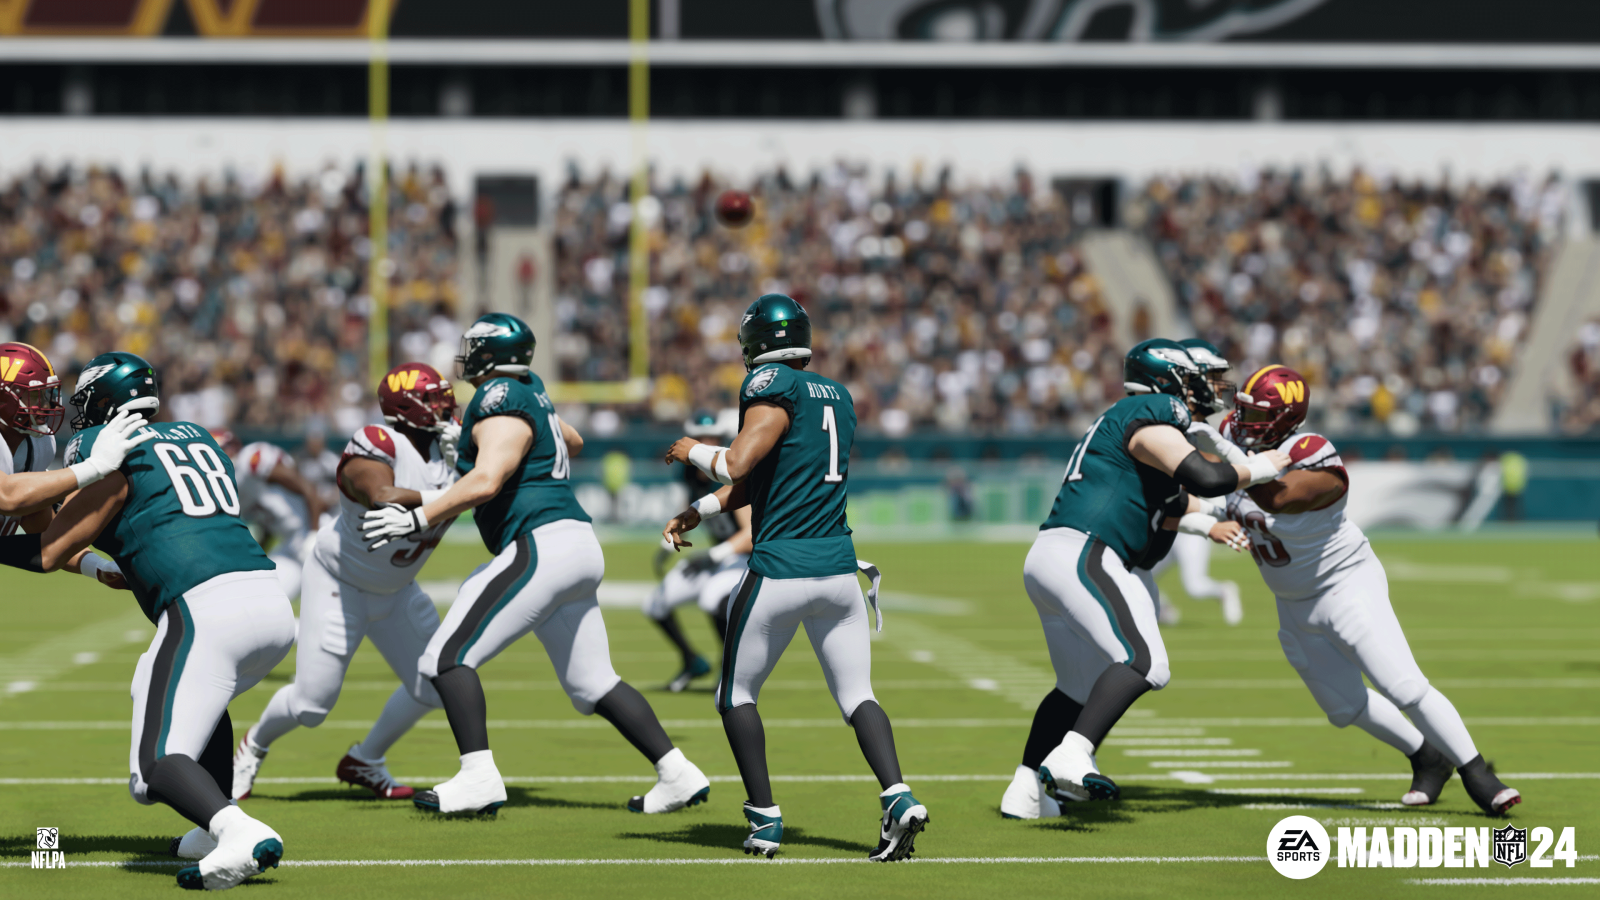 Madden NFL 23: Release date and everything we know right now